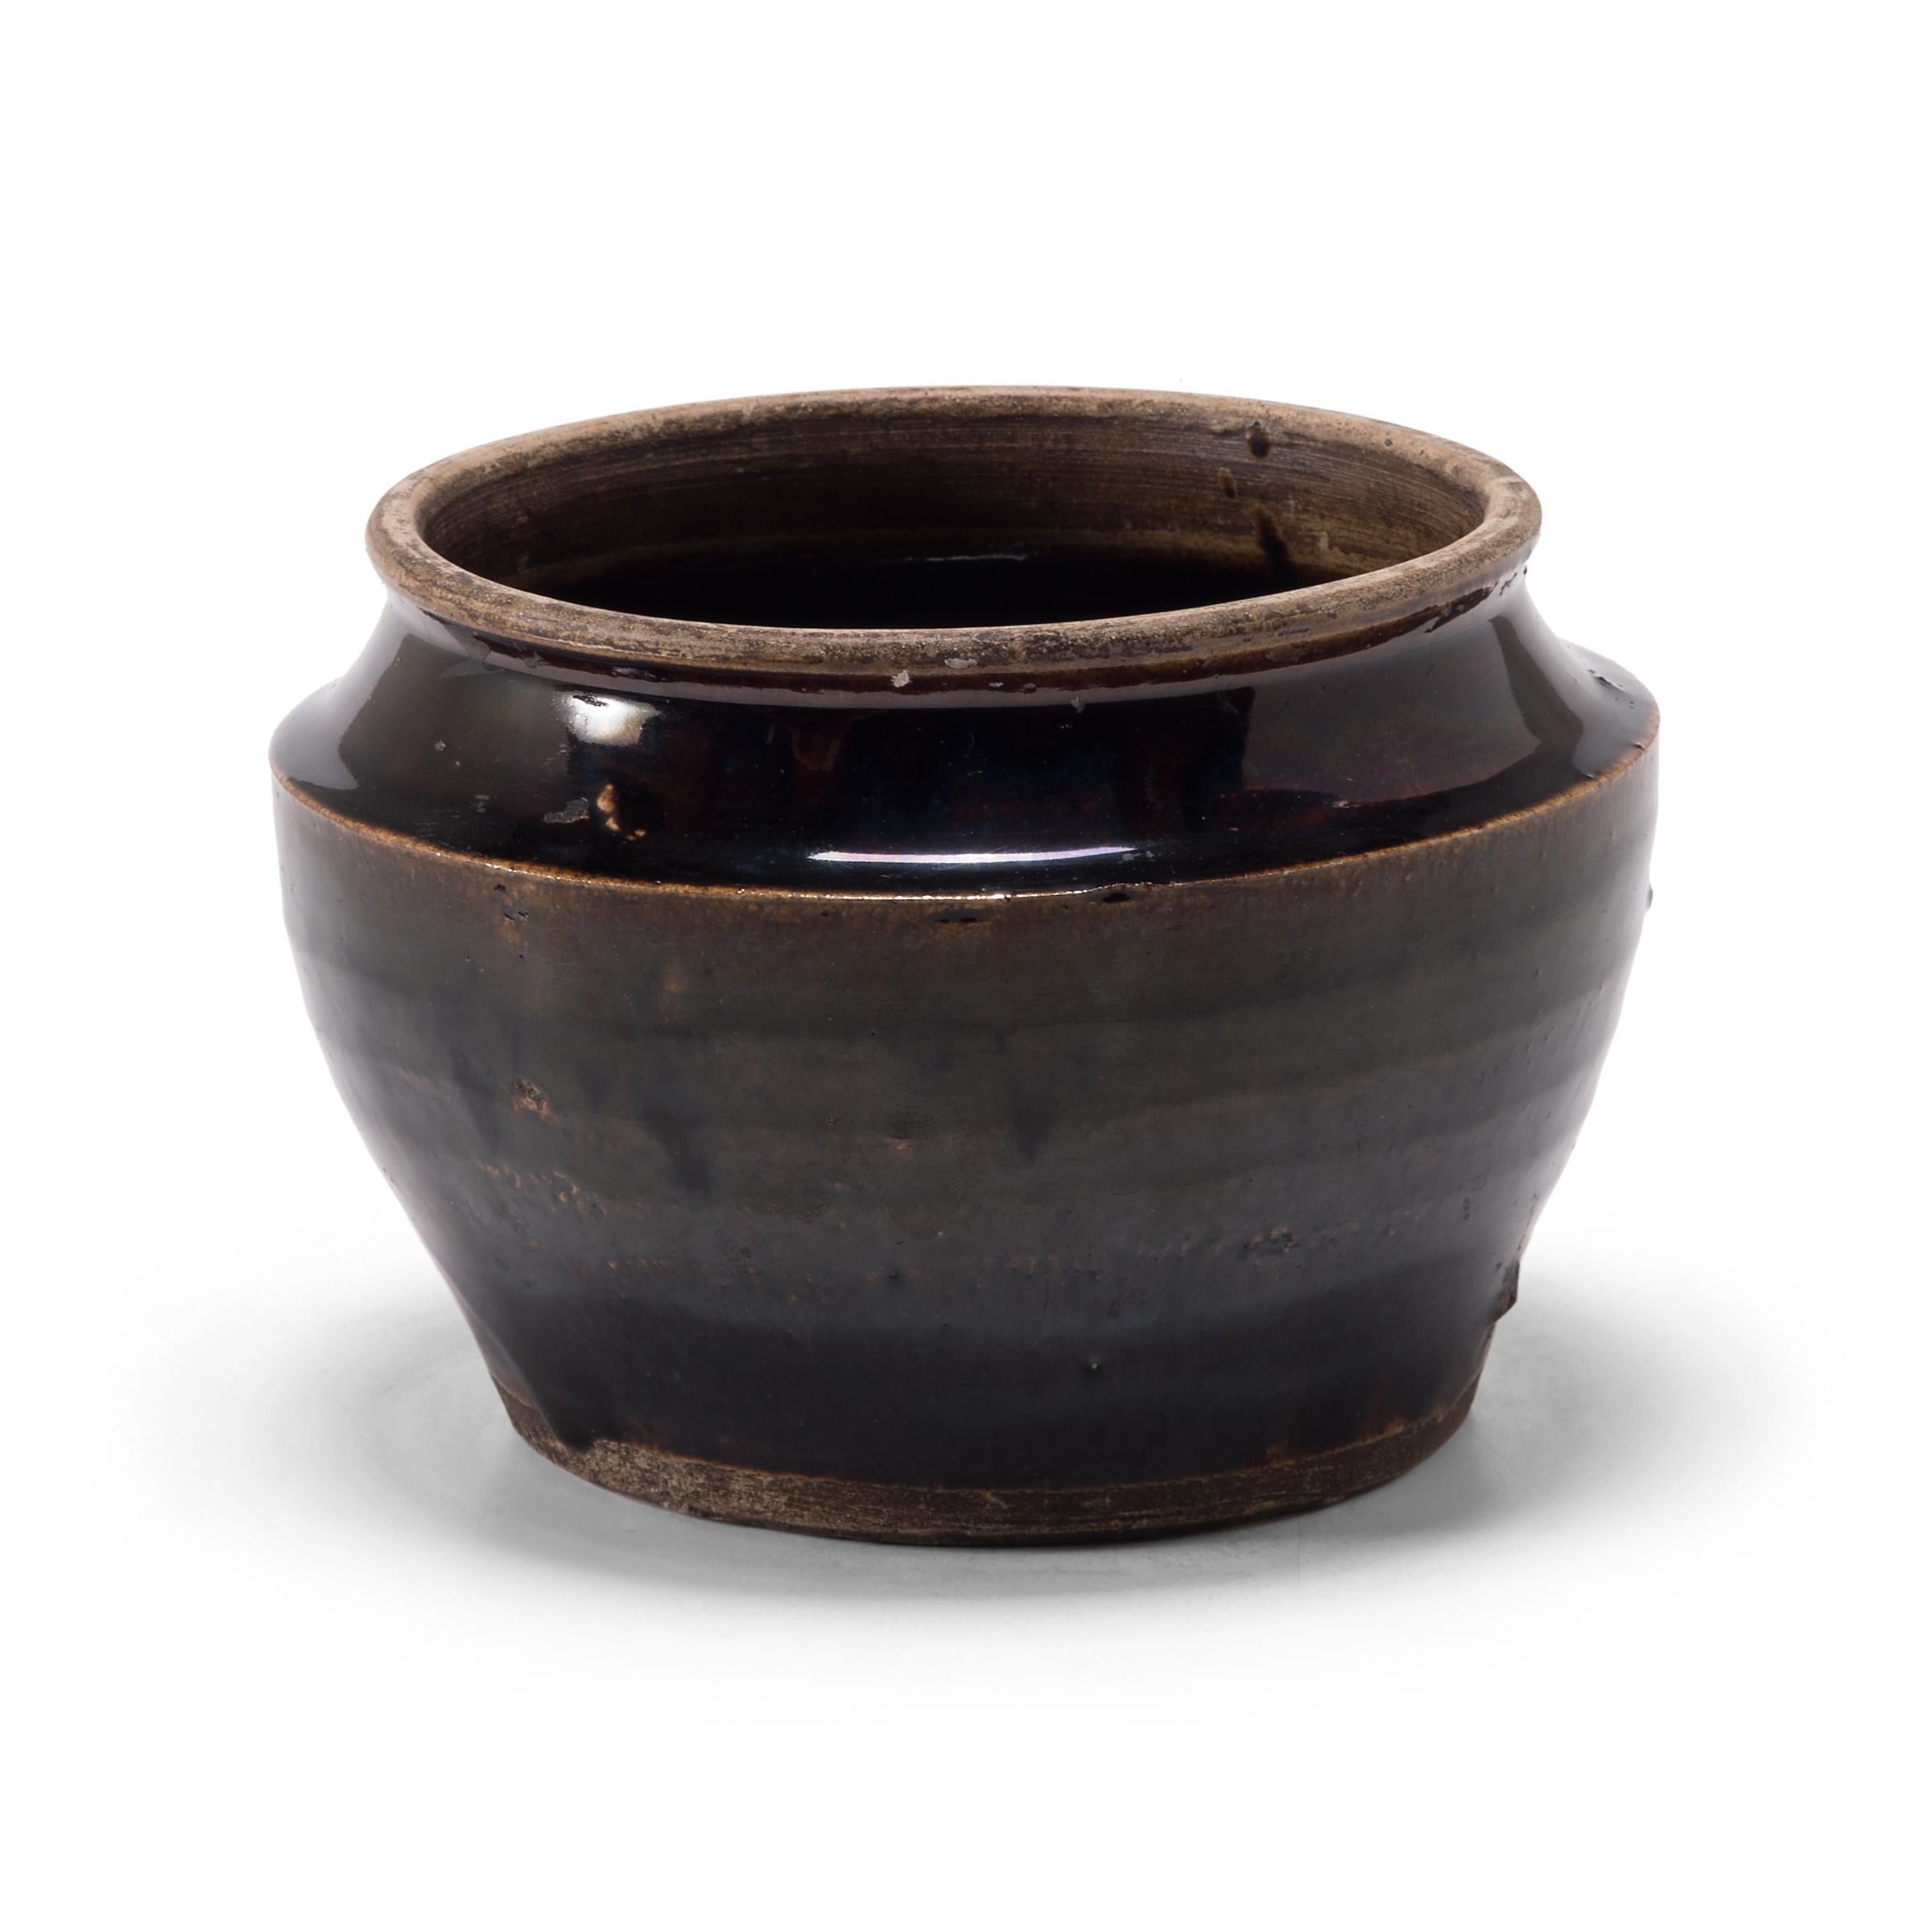 A dark glaze coats the angular body of this squat kitchen vessel, creating a subtle gradient as it spills over the tapered sides. The petite early 20th century dish was once used for storing food in a Qing dynasty kitchen, as evidenced by its